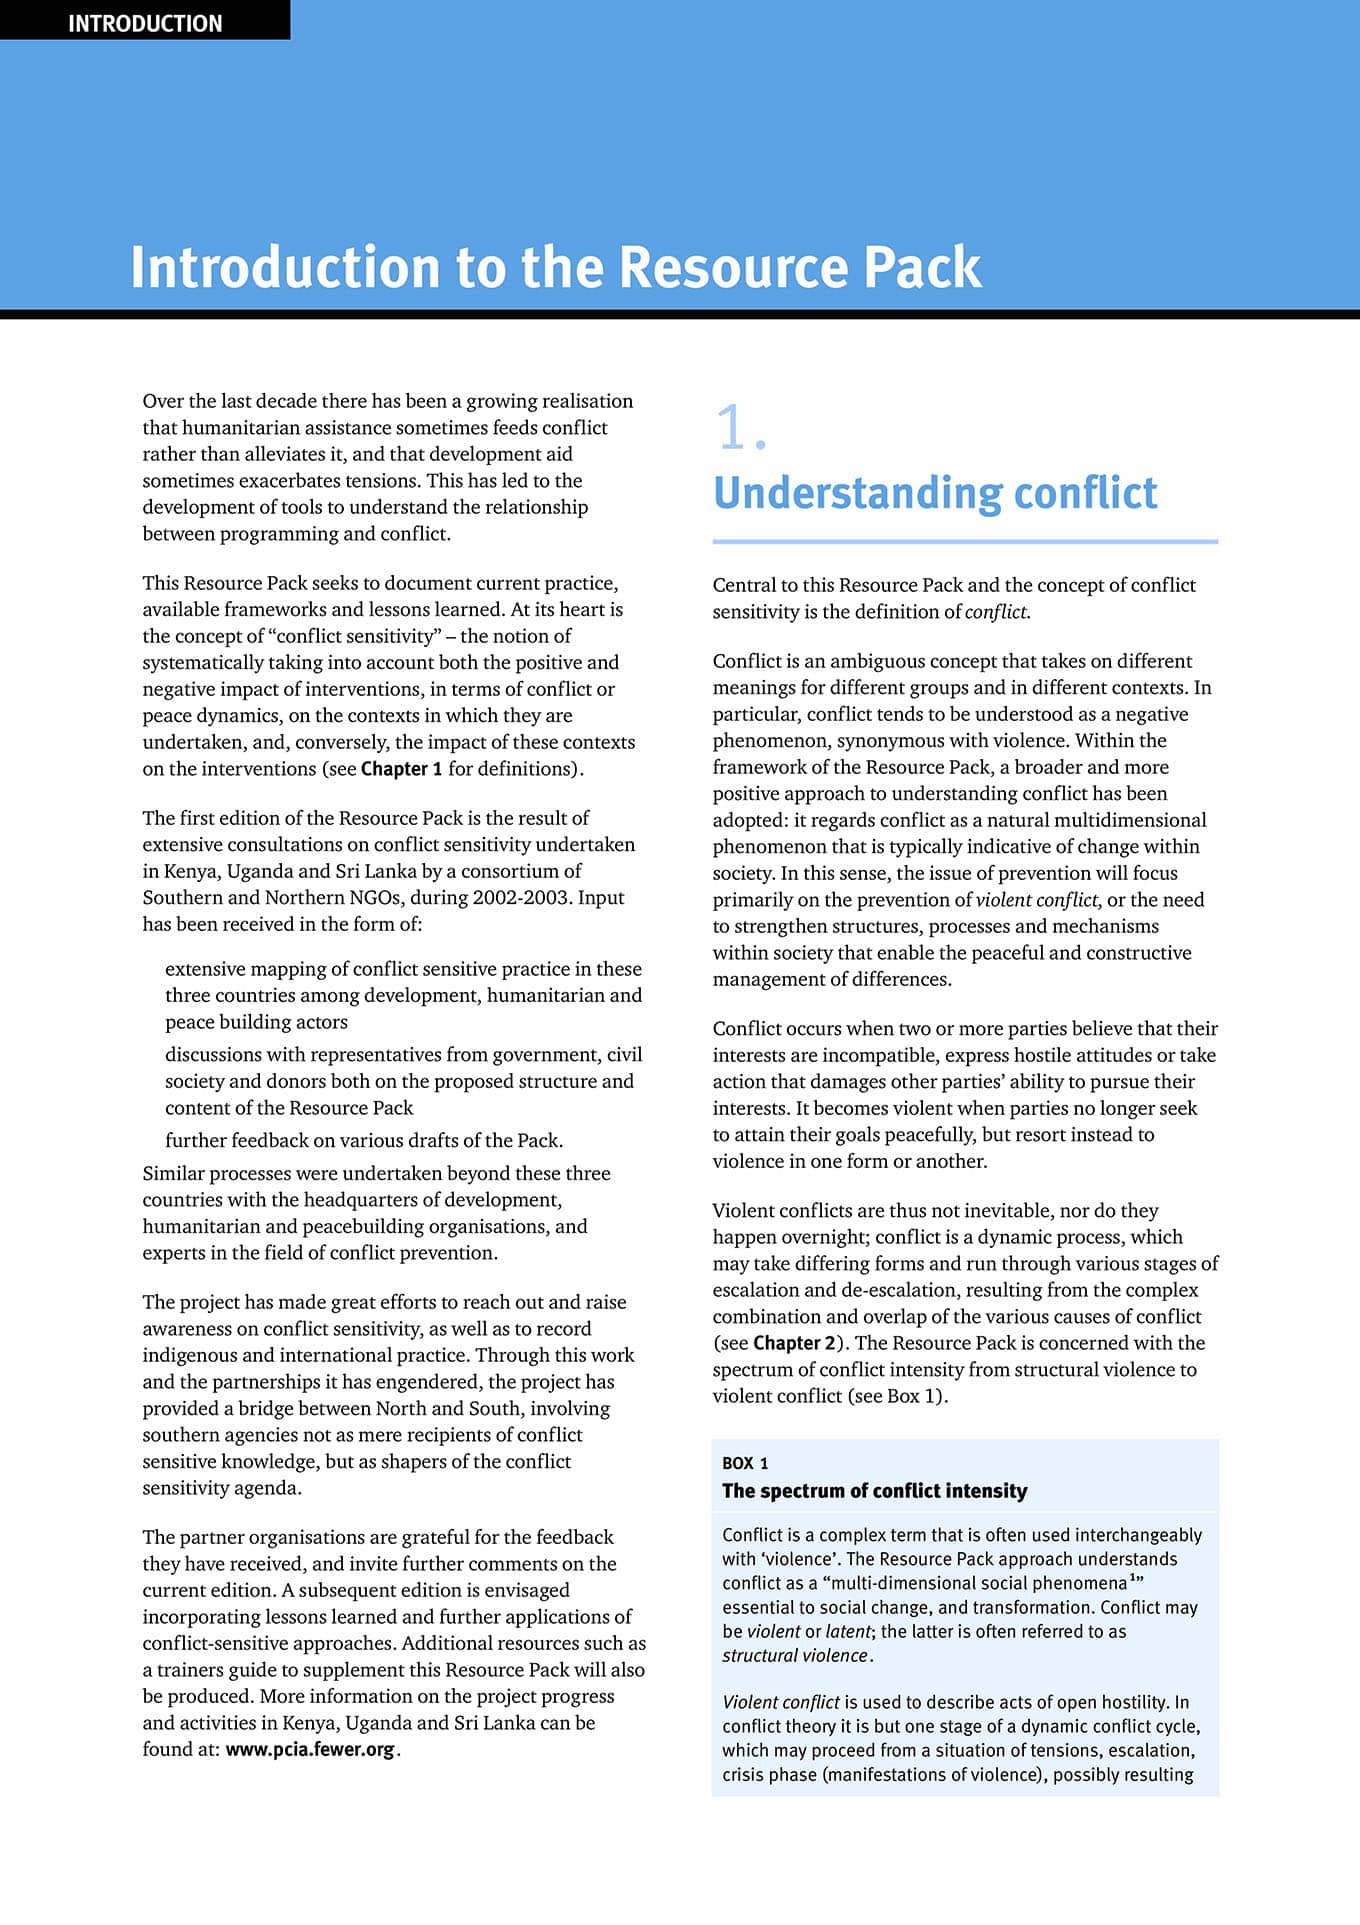 Conflict-Sensitive Approaches to Development, Humanitarian Assistance and Peacebuilding: Resource Pack (APFO, CECORE, CHA, FEWER, International Alert, Saferworld, 2004)